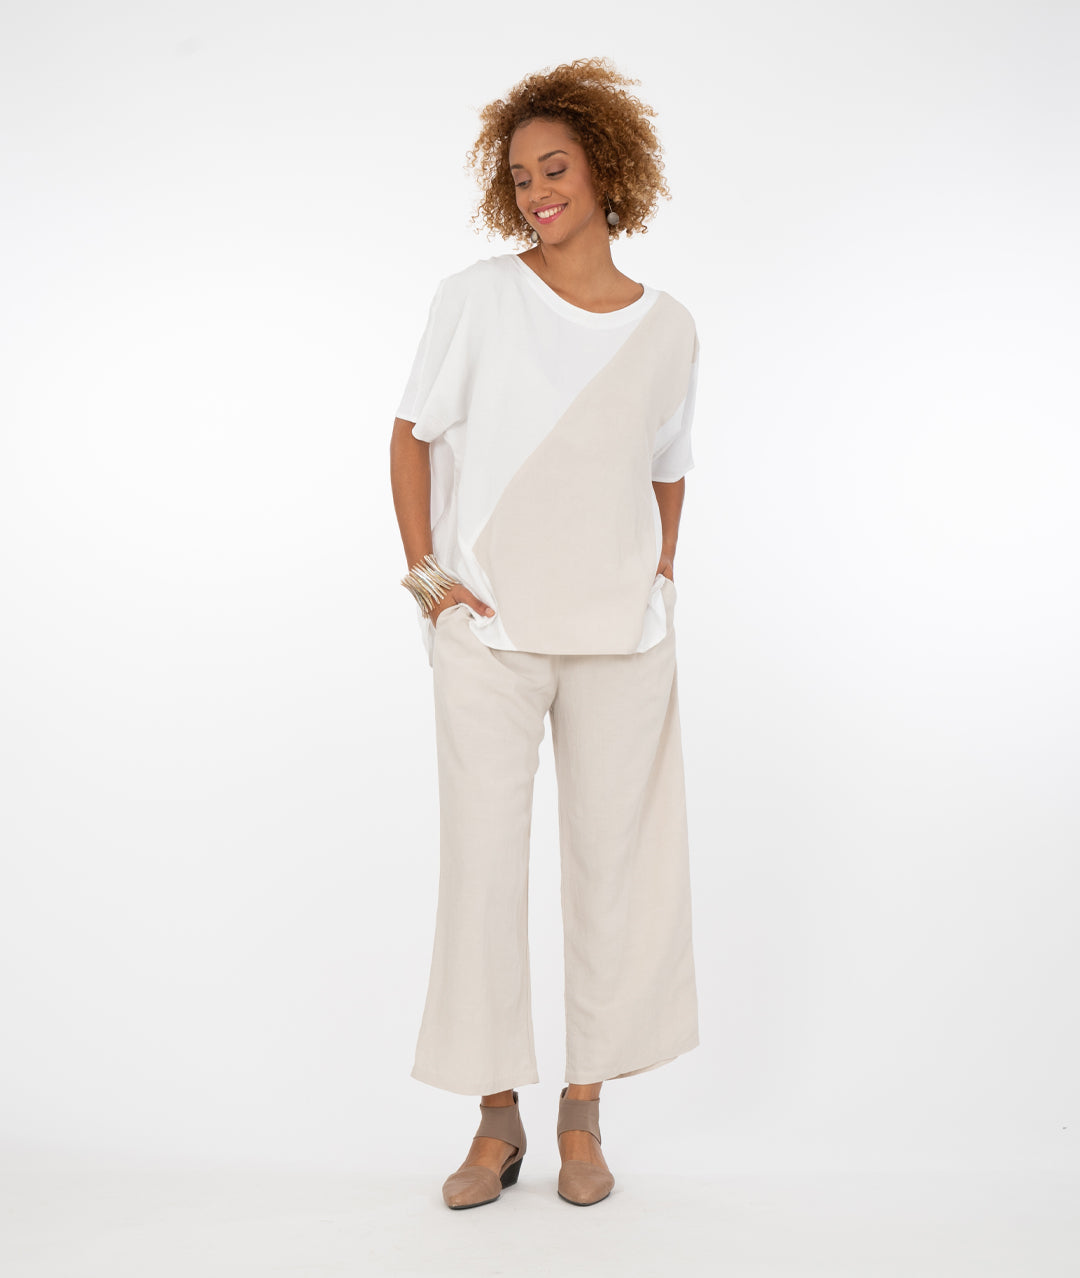 model in a white pullover tshirt style top with a contrasting color block across the body in a khaki color, with wide leg khaki color pants